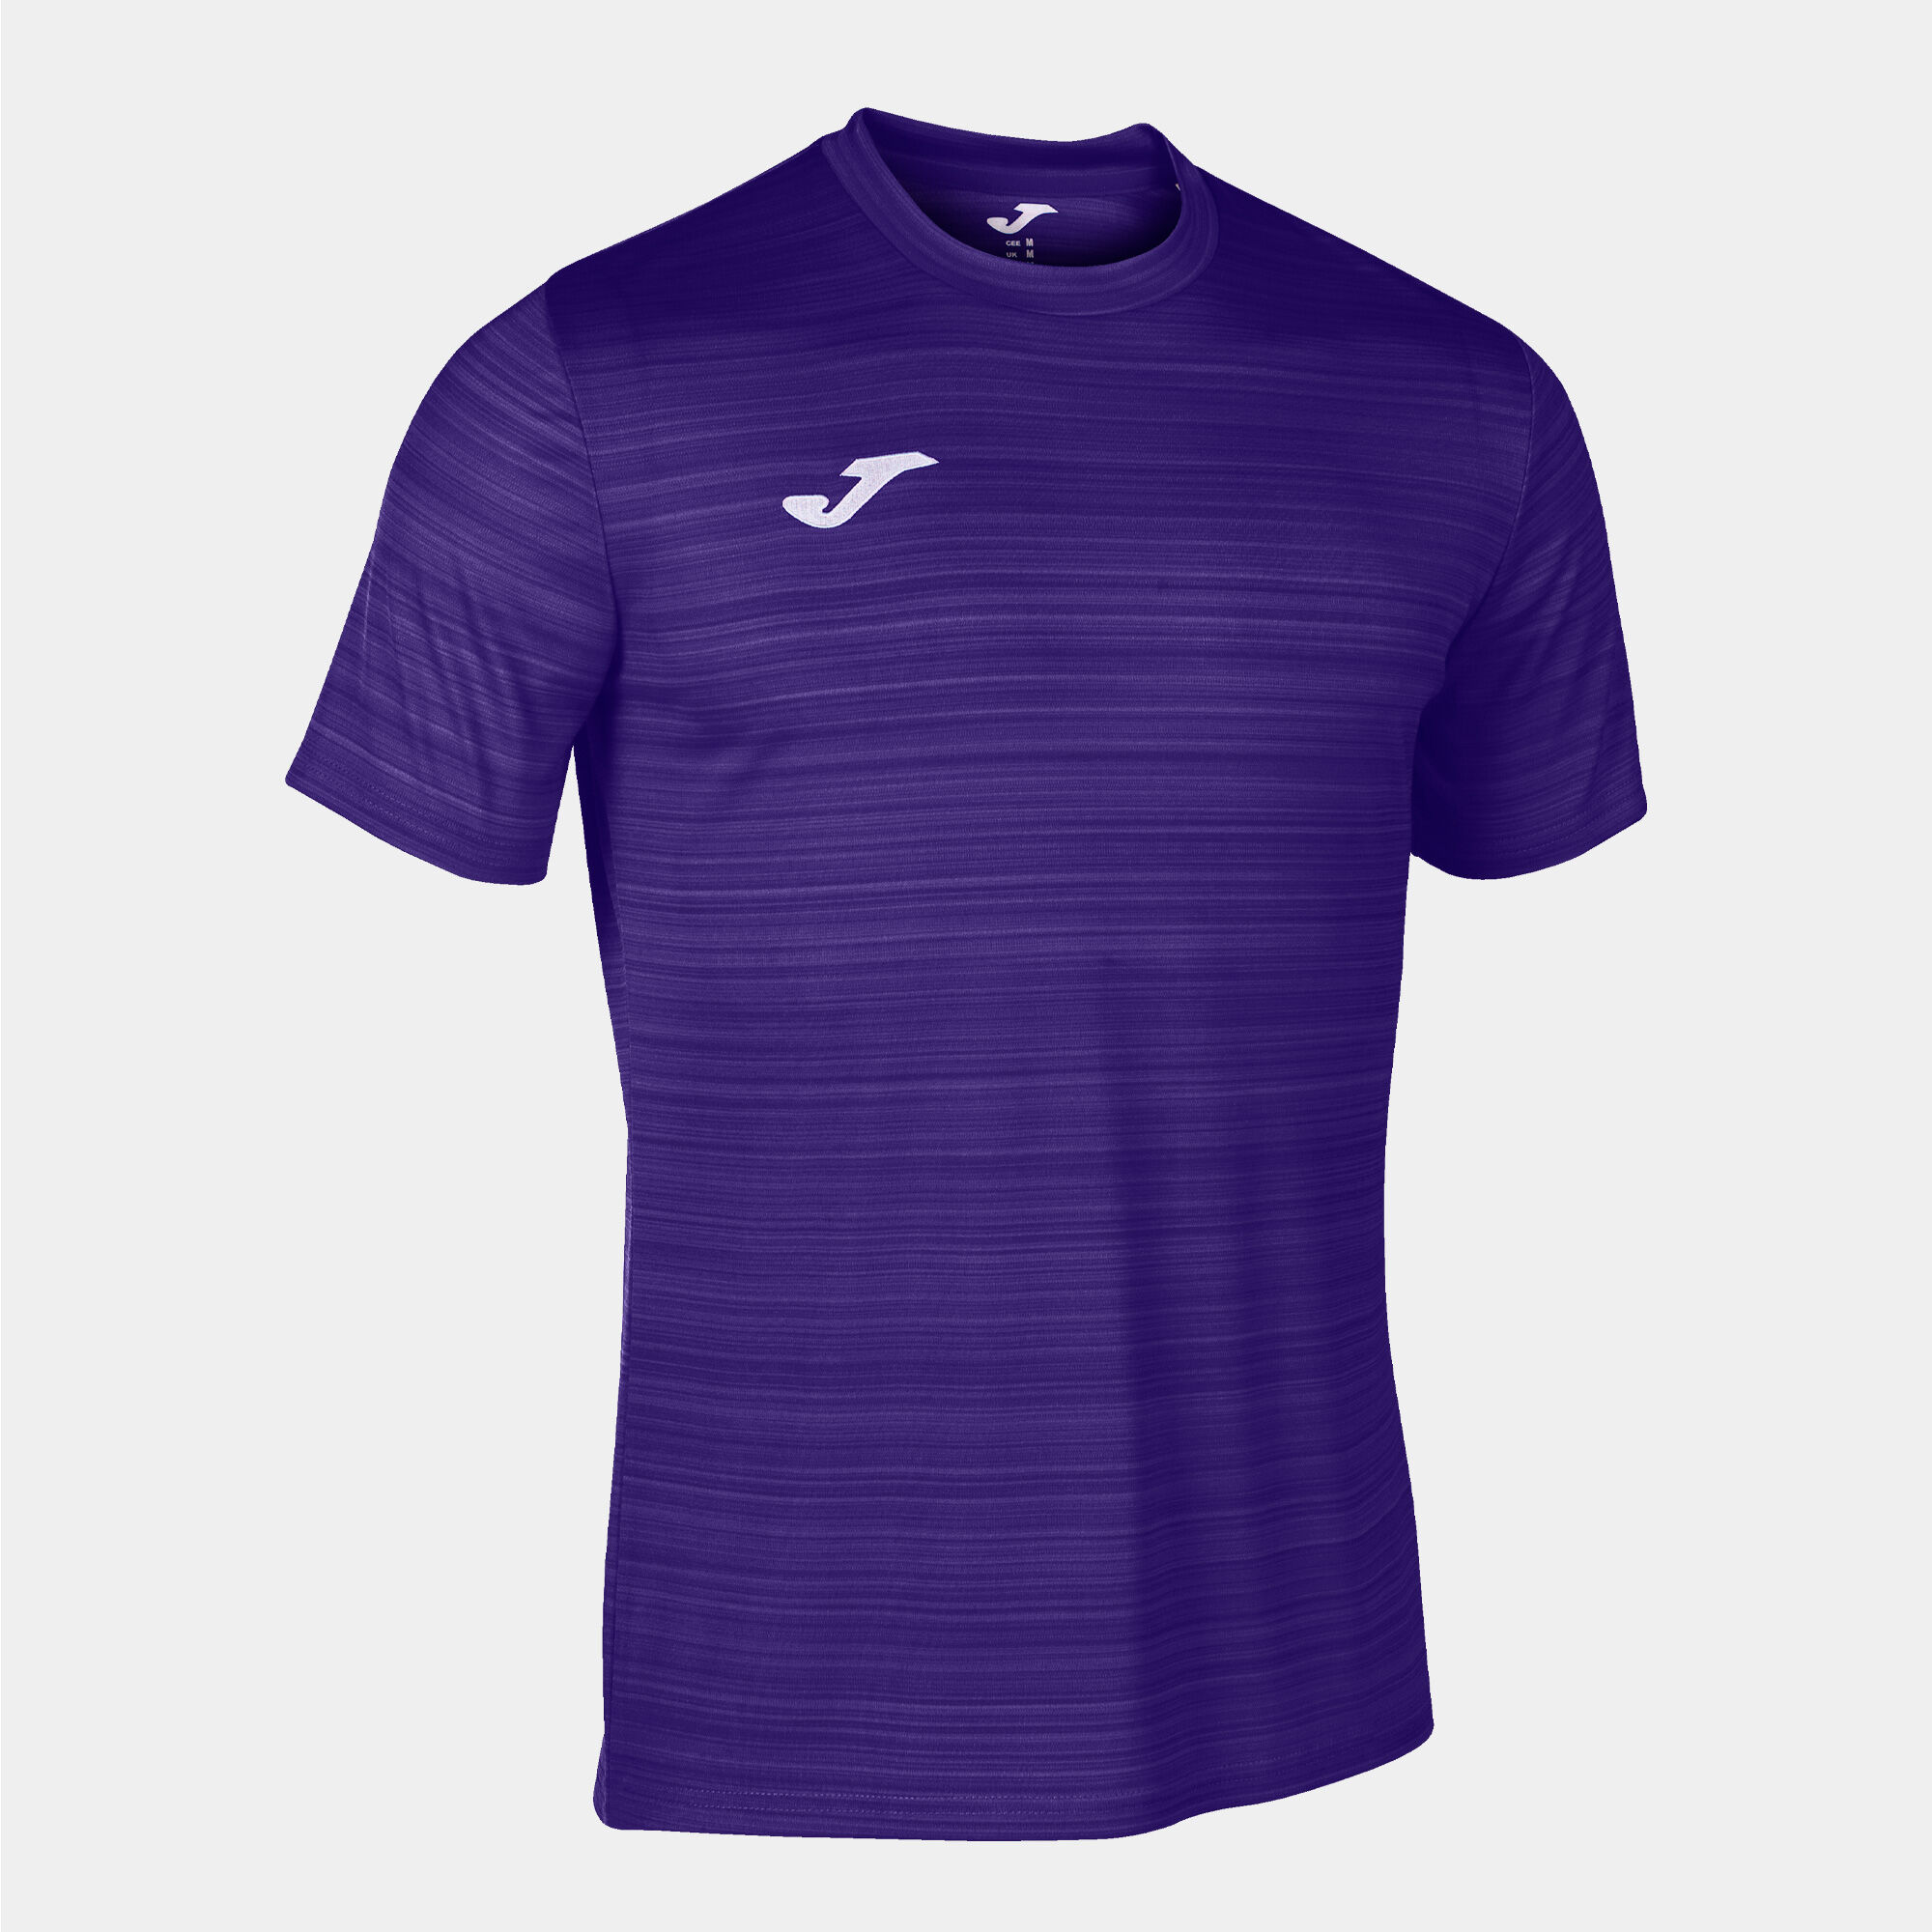 Maillot manches courtes homme Grafity III violet